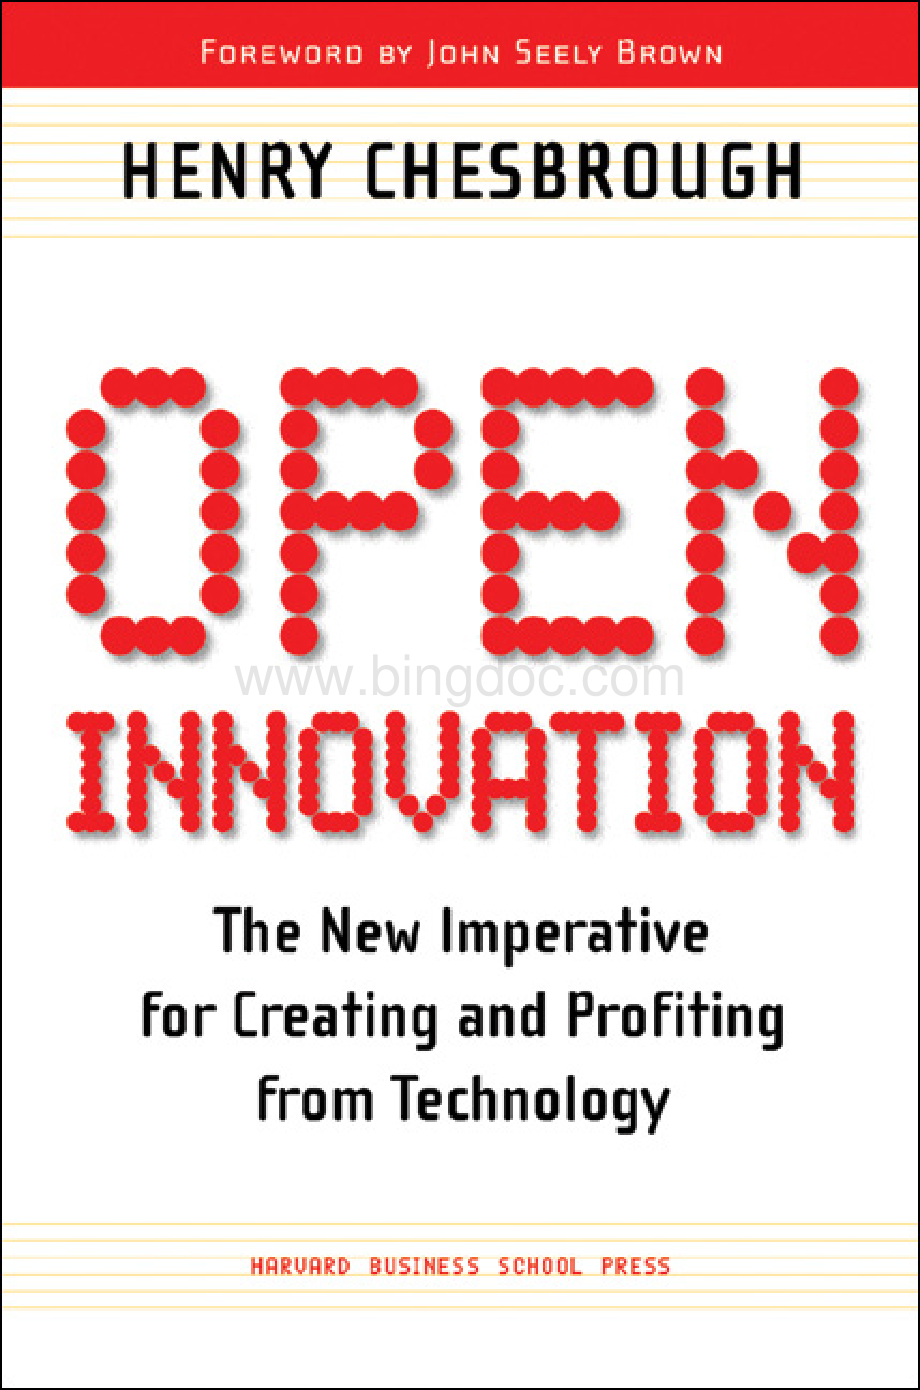 HBR Open Innovation The New Imperative for Creating and Profiting from Technology 2003 ISBN1578518377.pdf